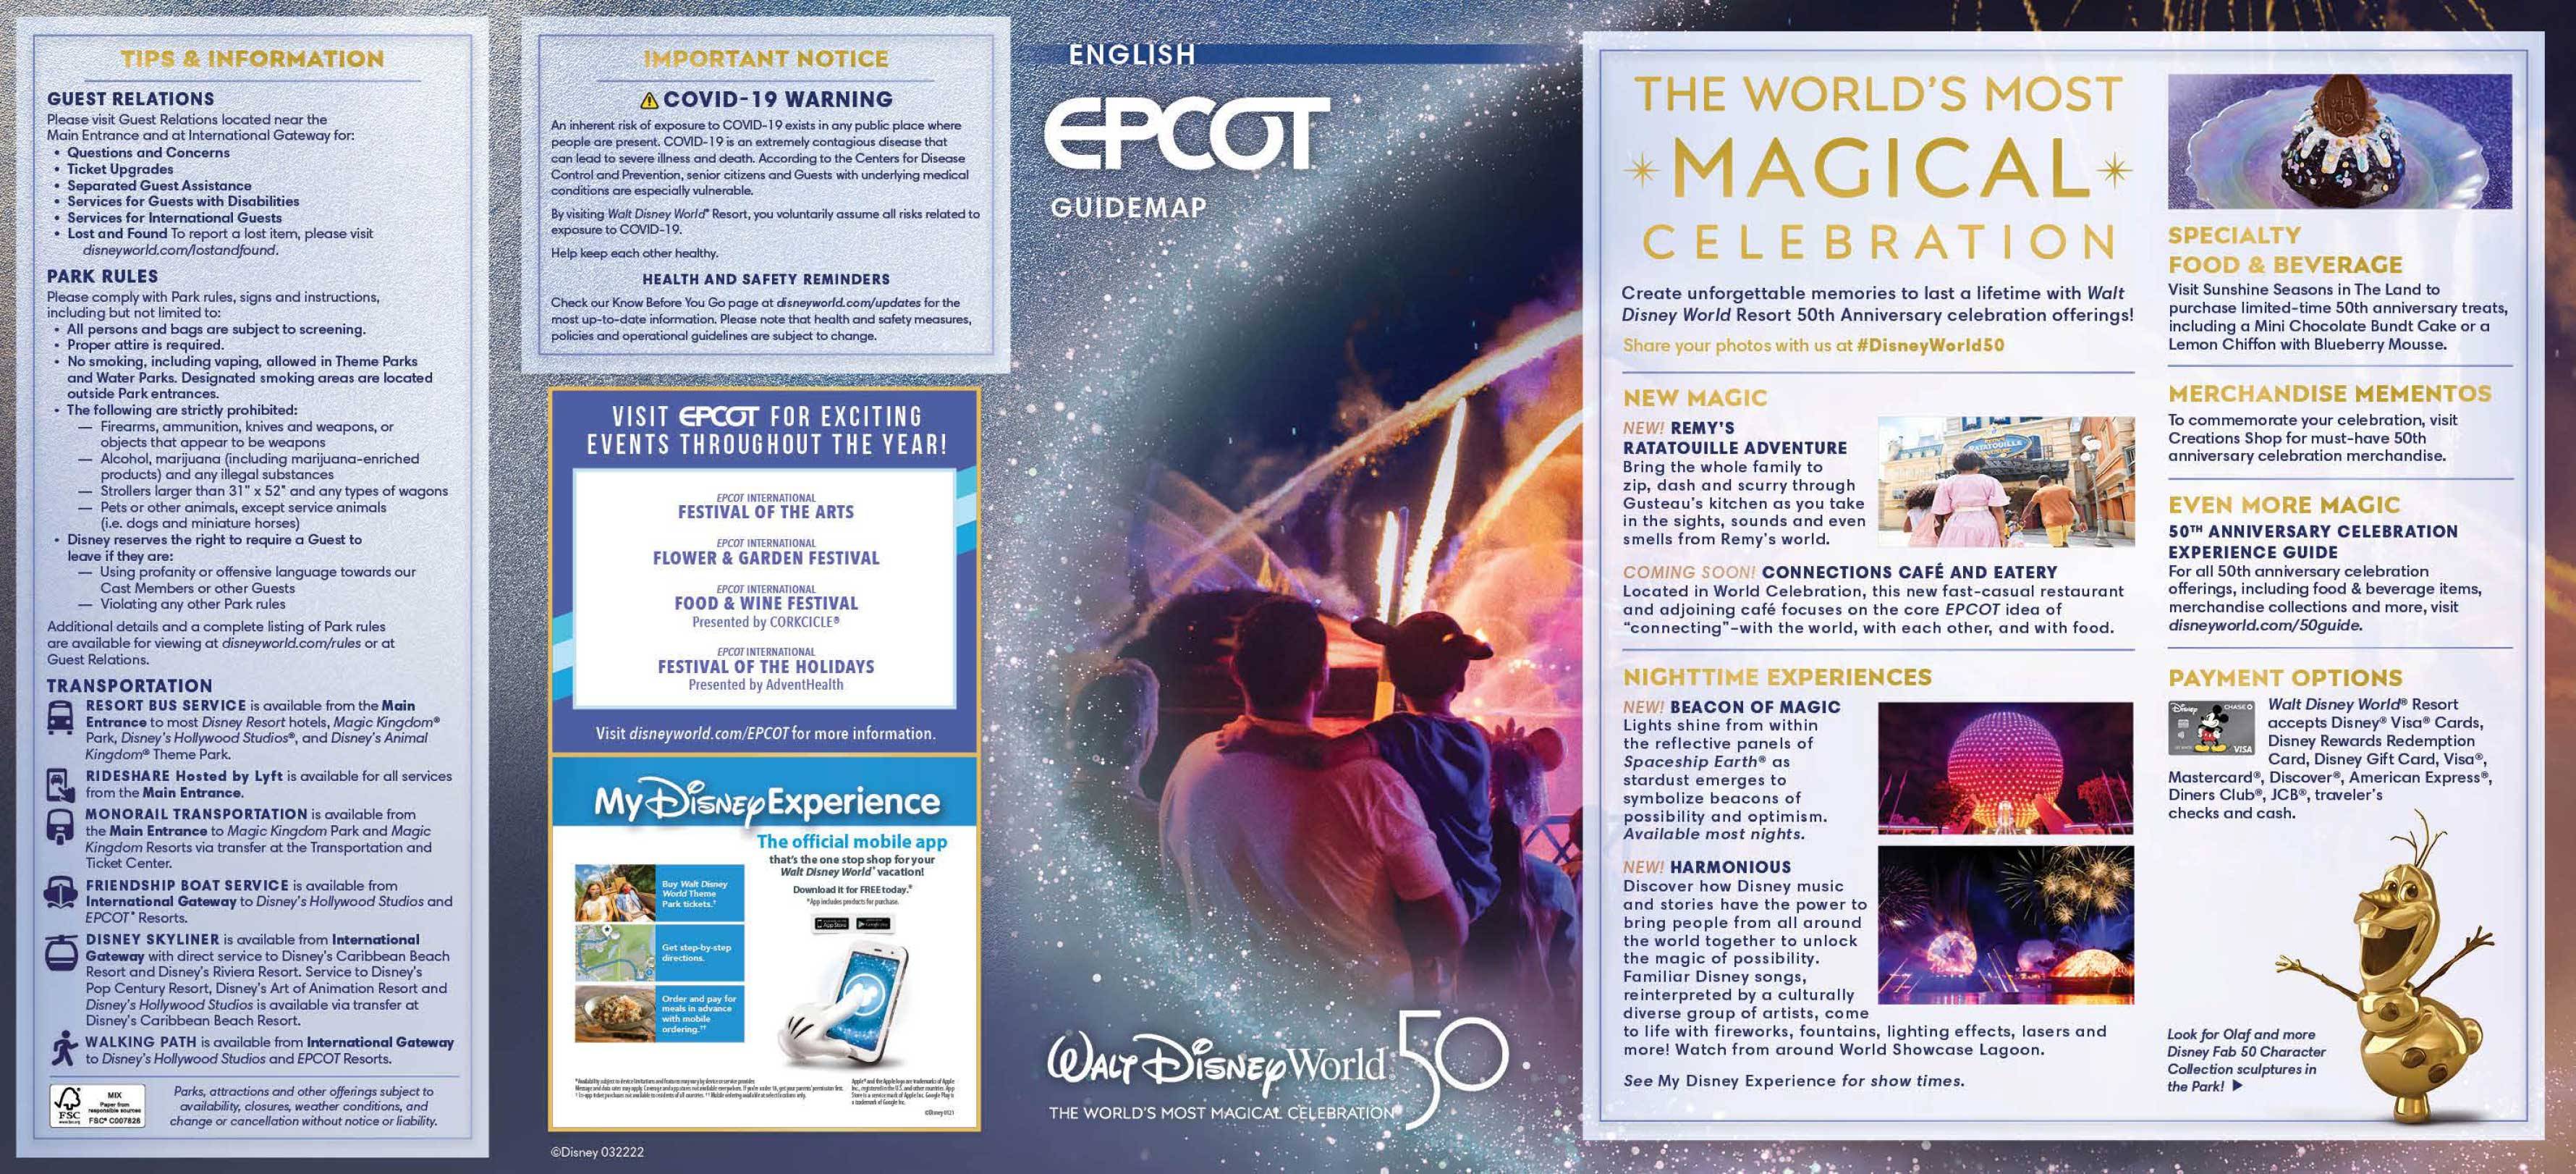 EPCOT guide map - March 2022 - Front